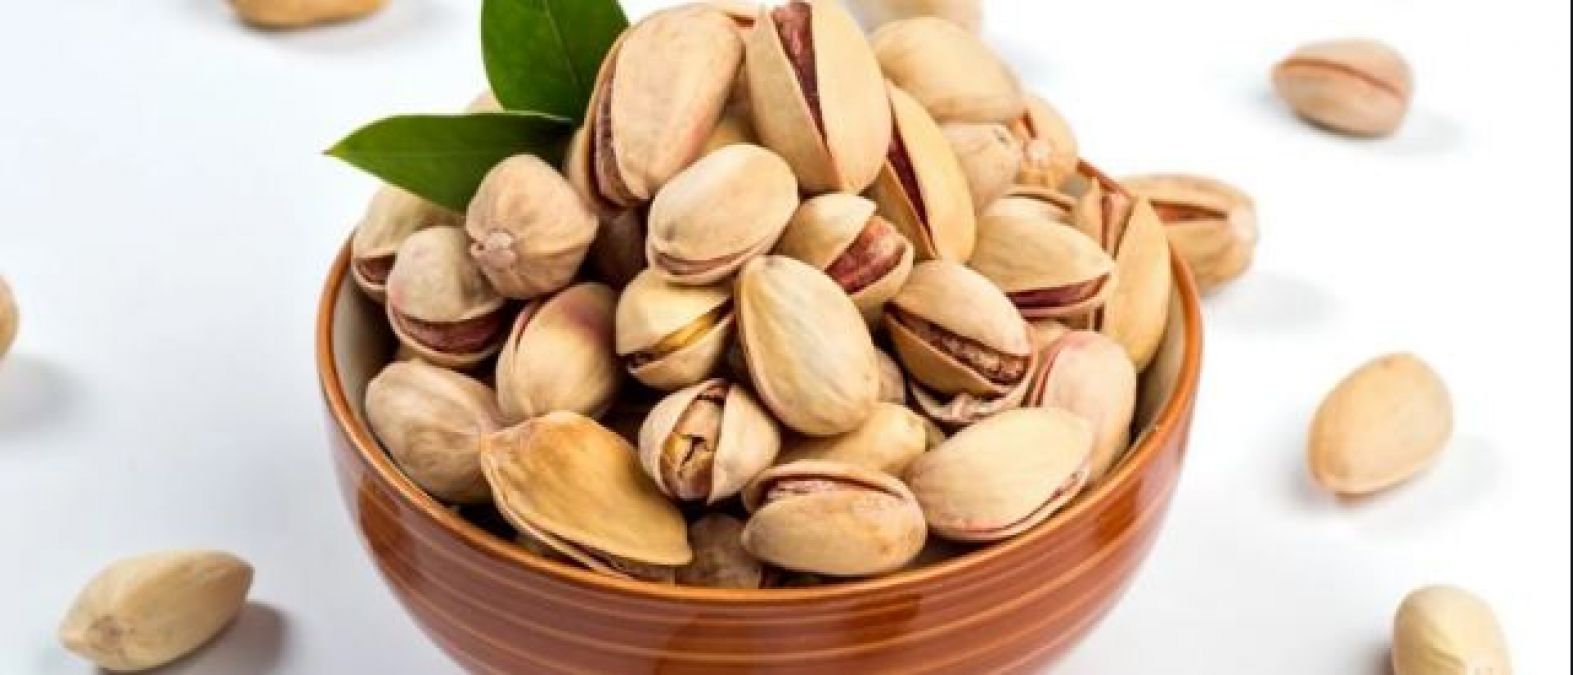 Due to these properties, pistachio is a power food for the brain